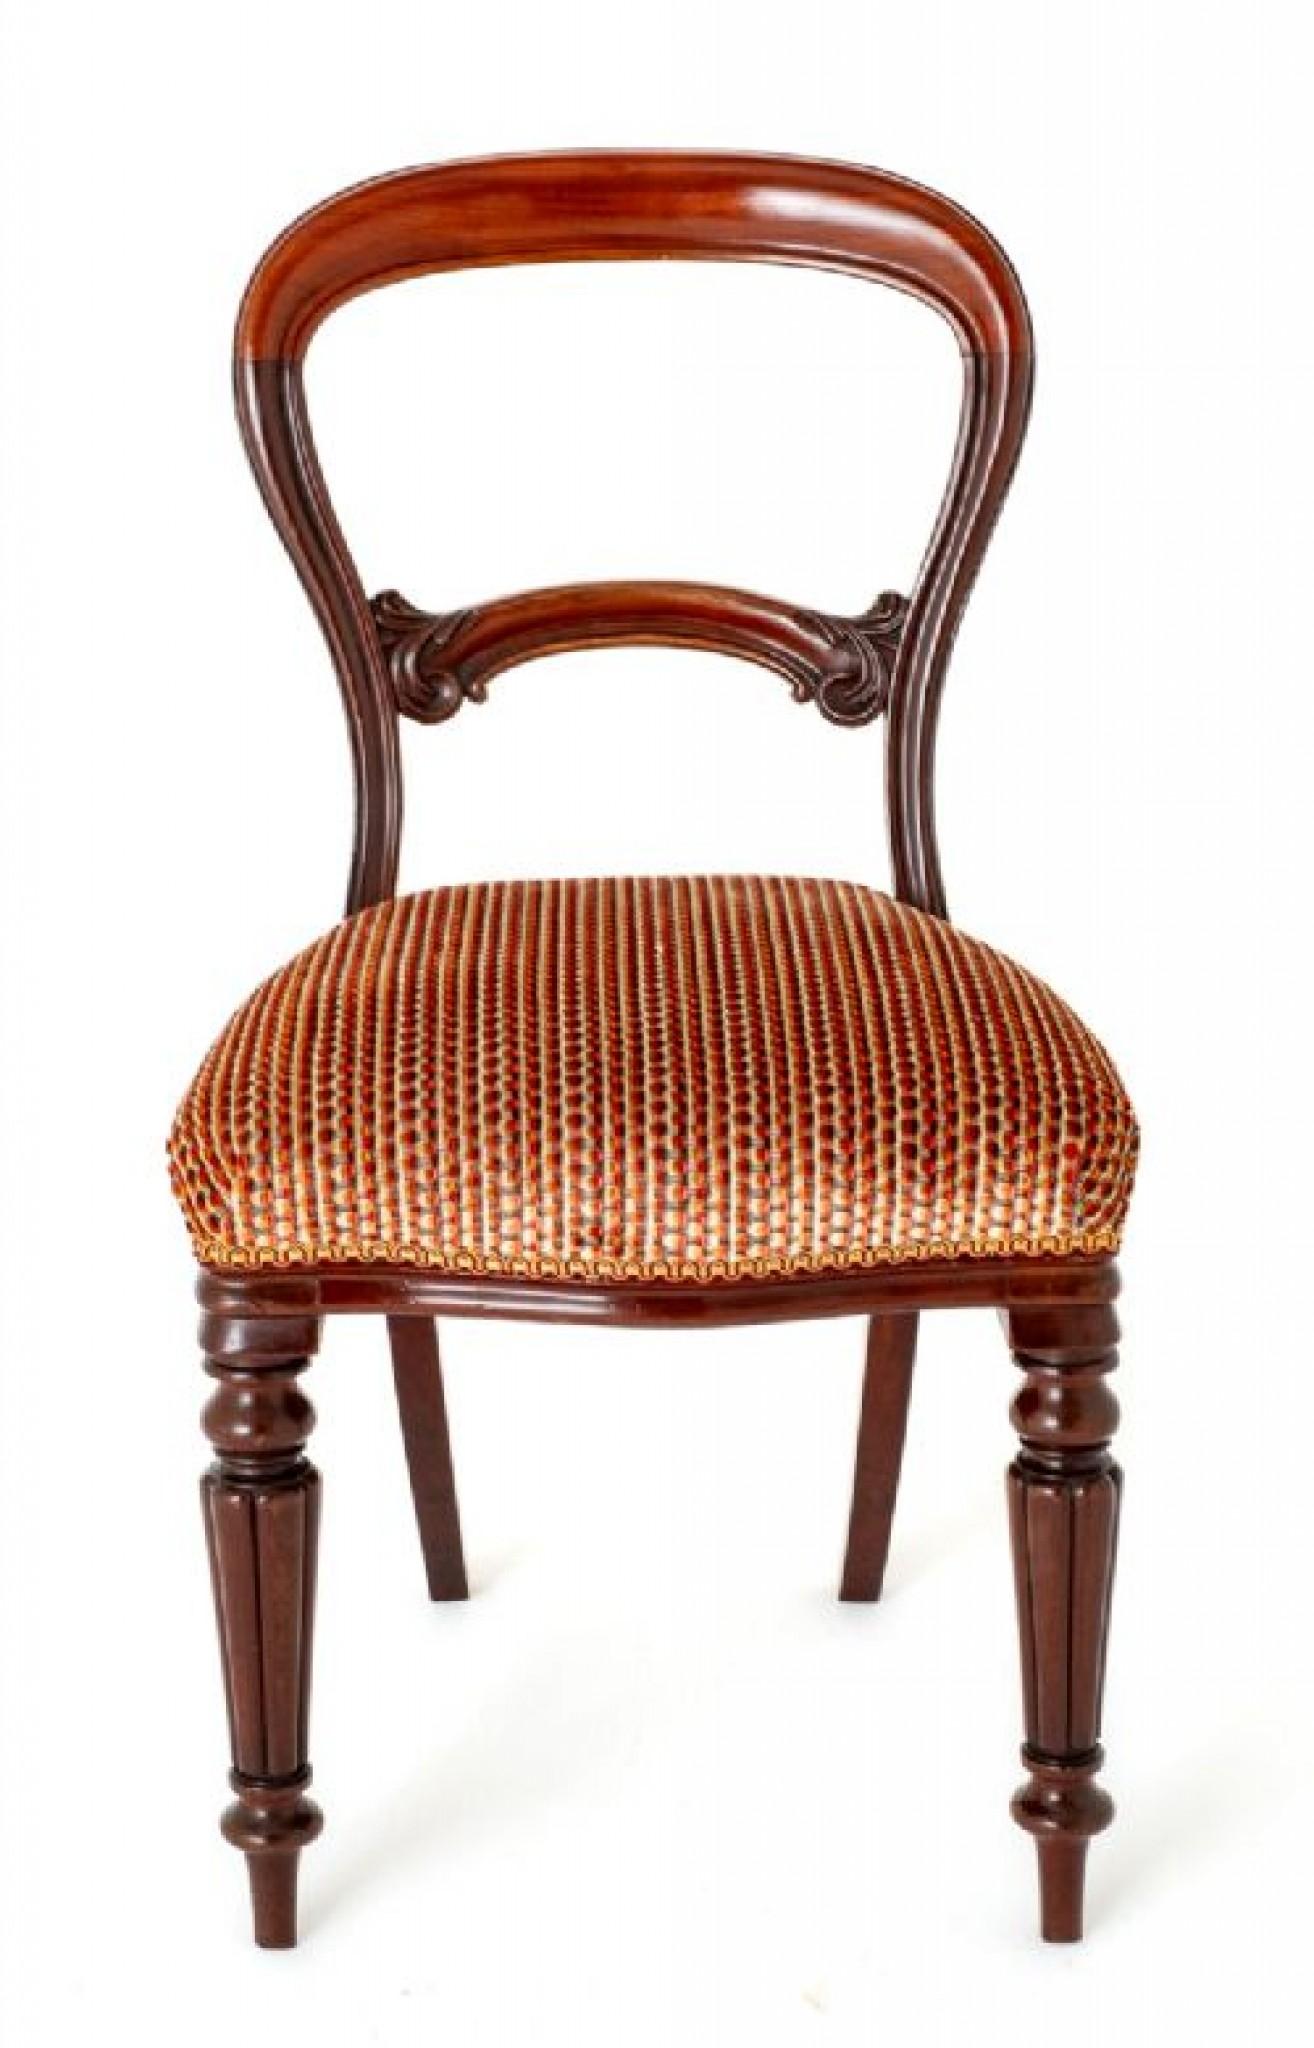 Here we Have a Quality Set of 8 Early Victorian Mahogany Balloon Back Dining Chairs Made From Quality Timber.
Circa 1850
The Front Legs Being of a Ring Turned and Fluted Form, The Back Legs Being of a Sabre Form.
The Chairs Feature a Typical Early